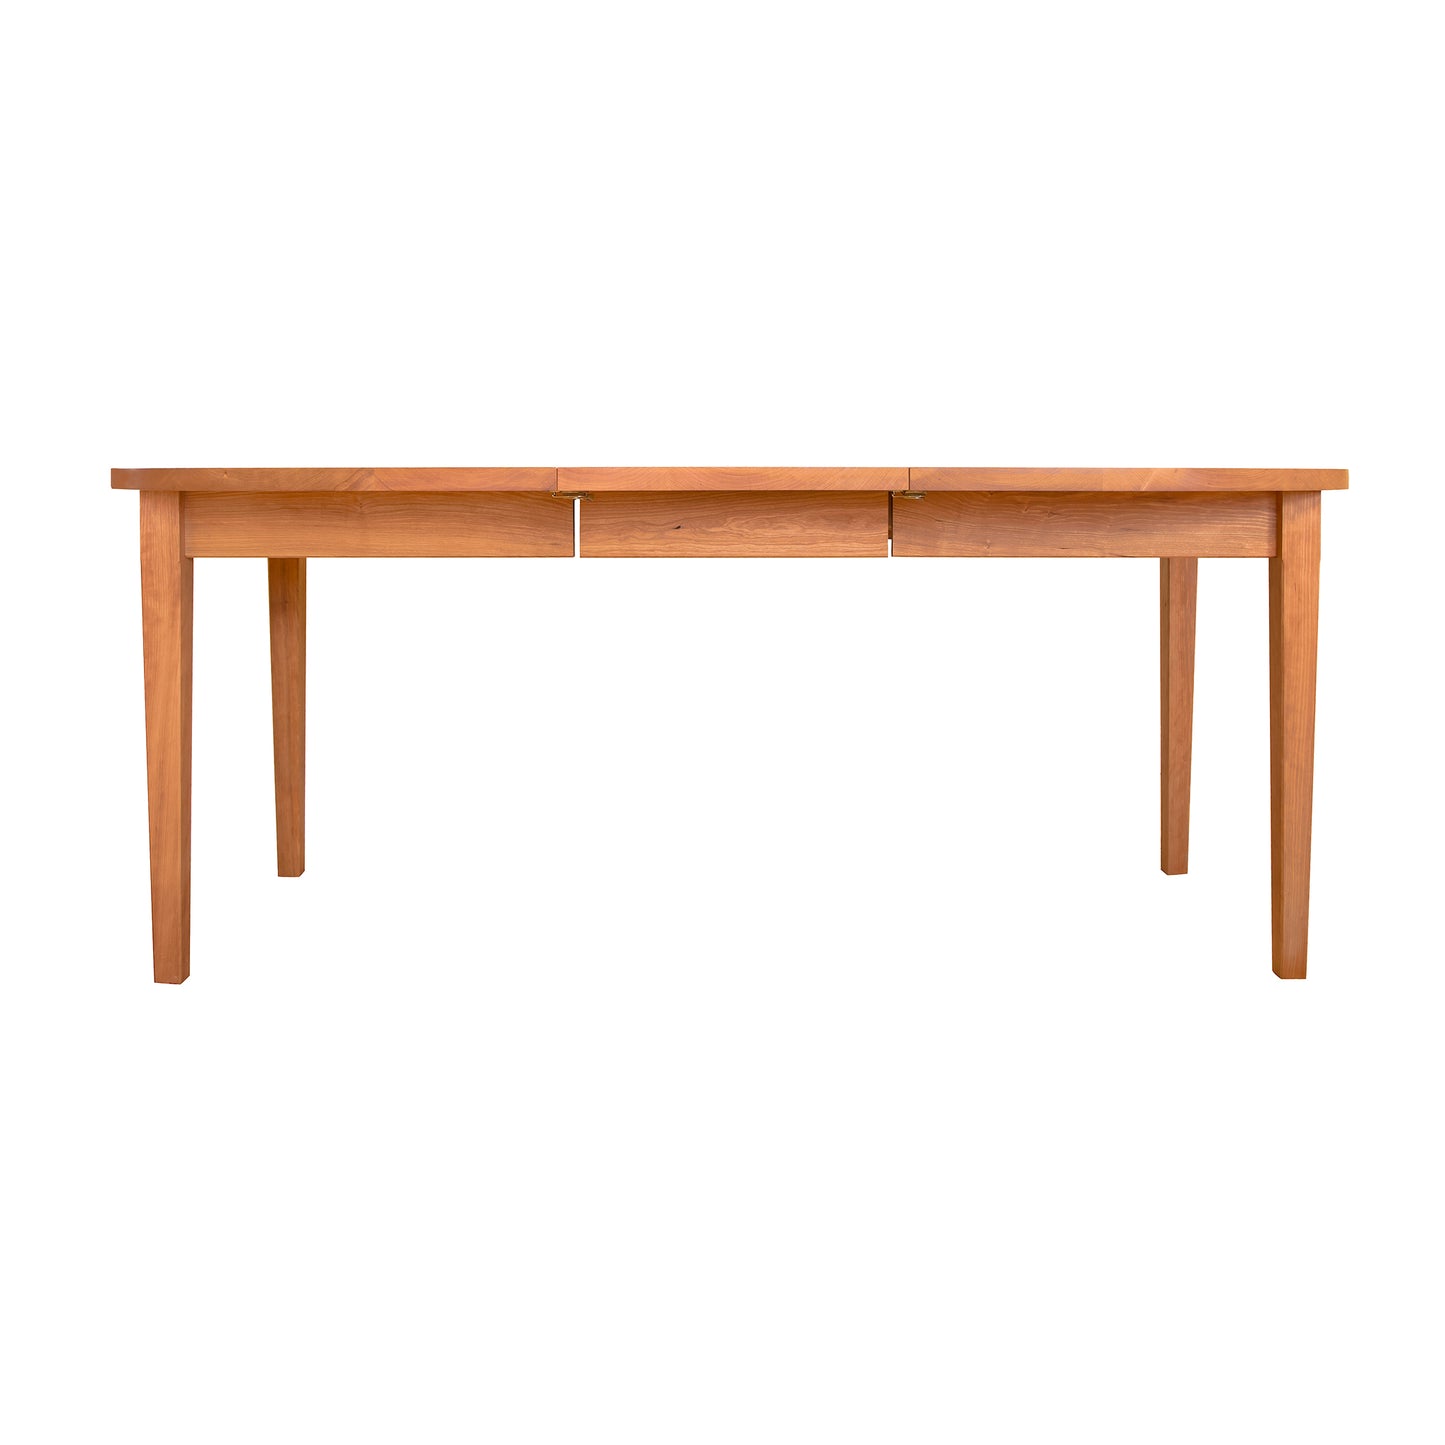 A handcrafted Maple Corner Woodworks Vermont Shaker Oval Extension dining table made of wood with two drawers.